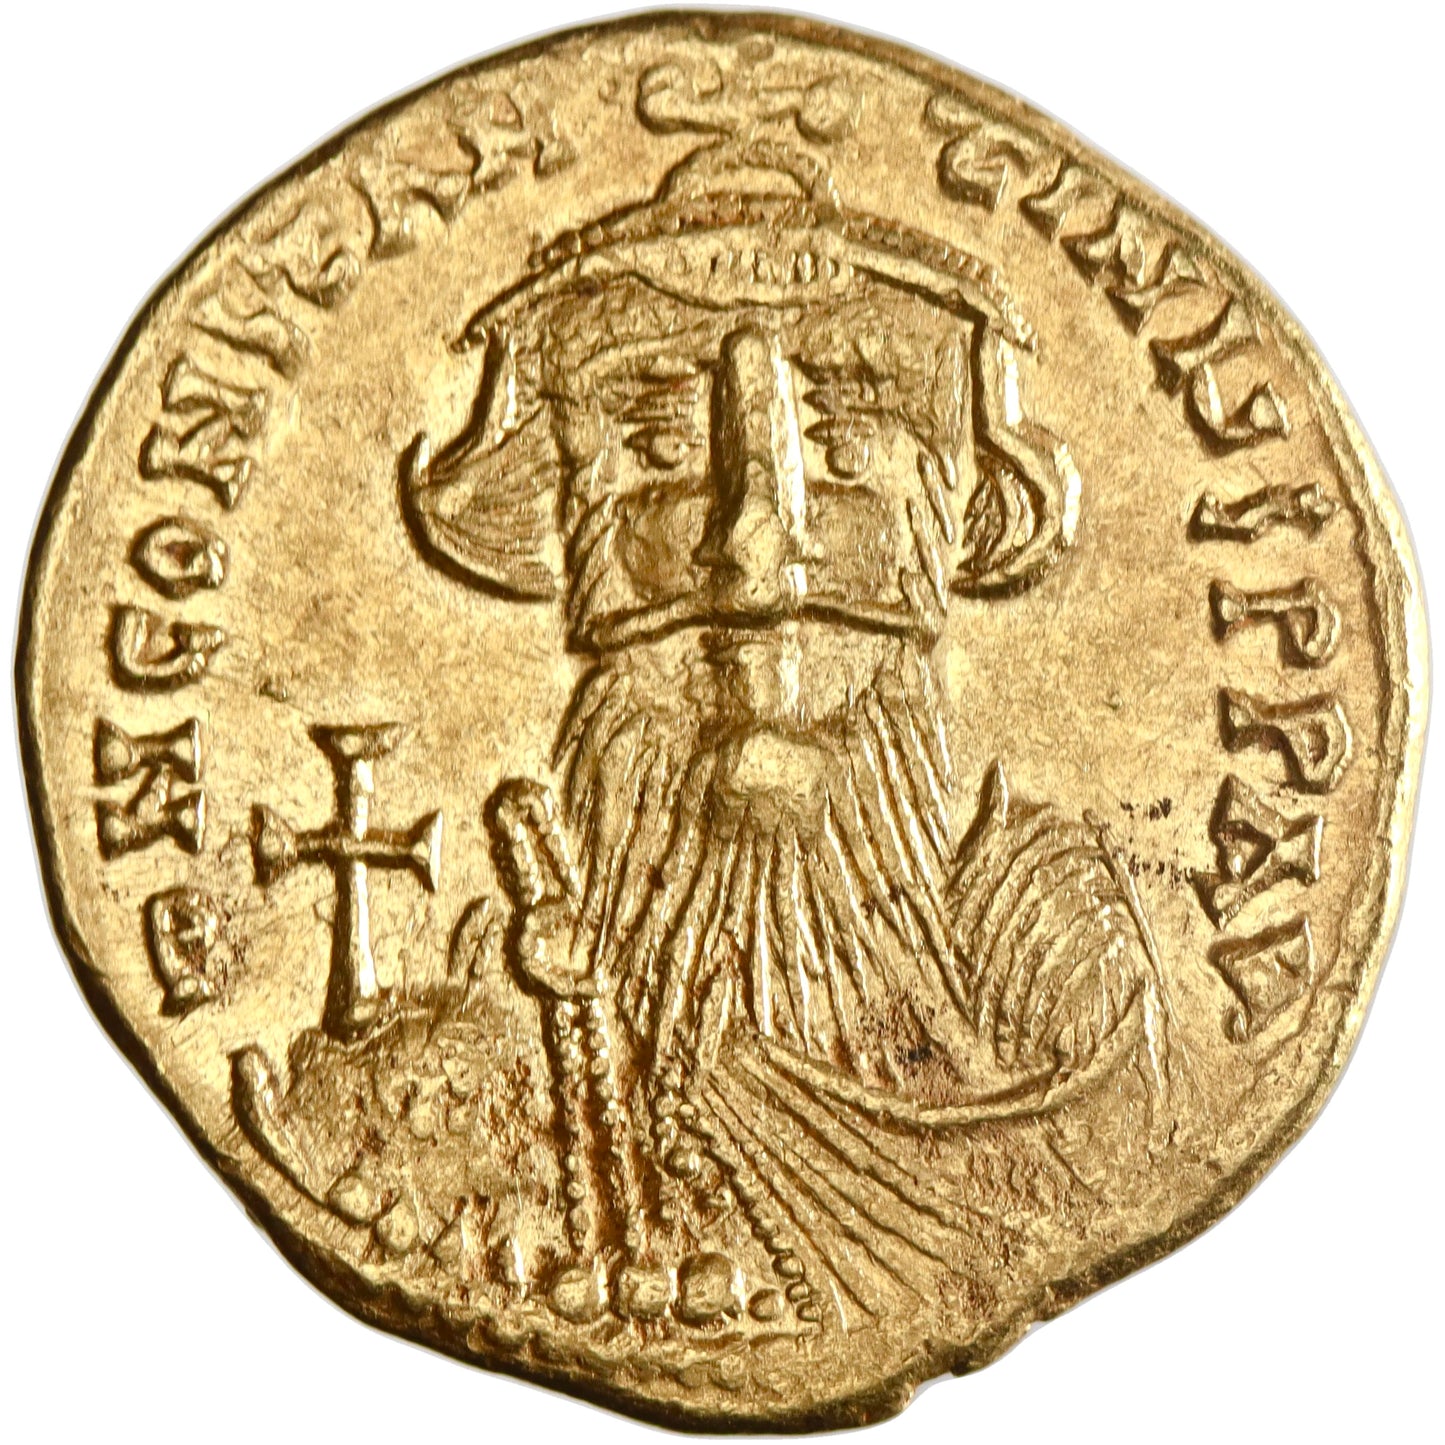 Byzantine, Constans II, gold solidus, Constantinople mint, officina S (6th), 651-654 CE